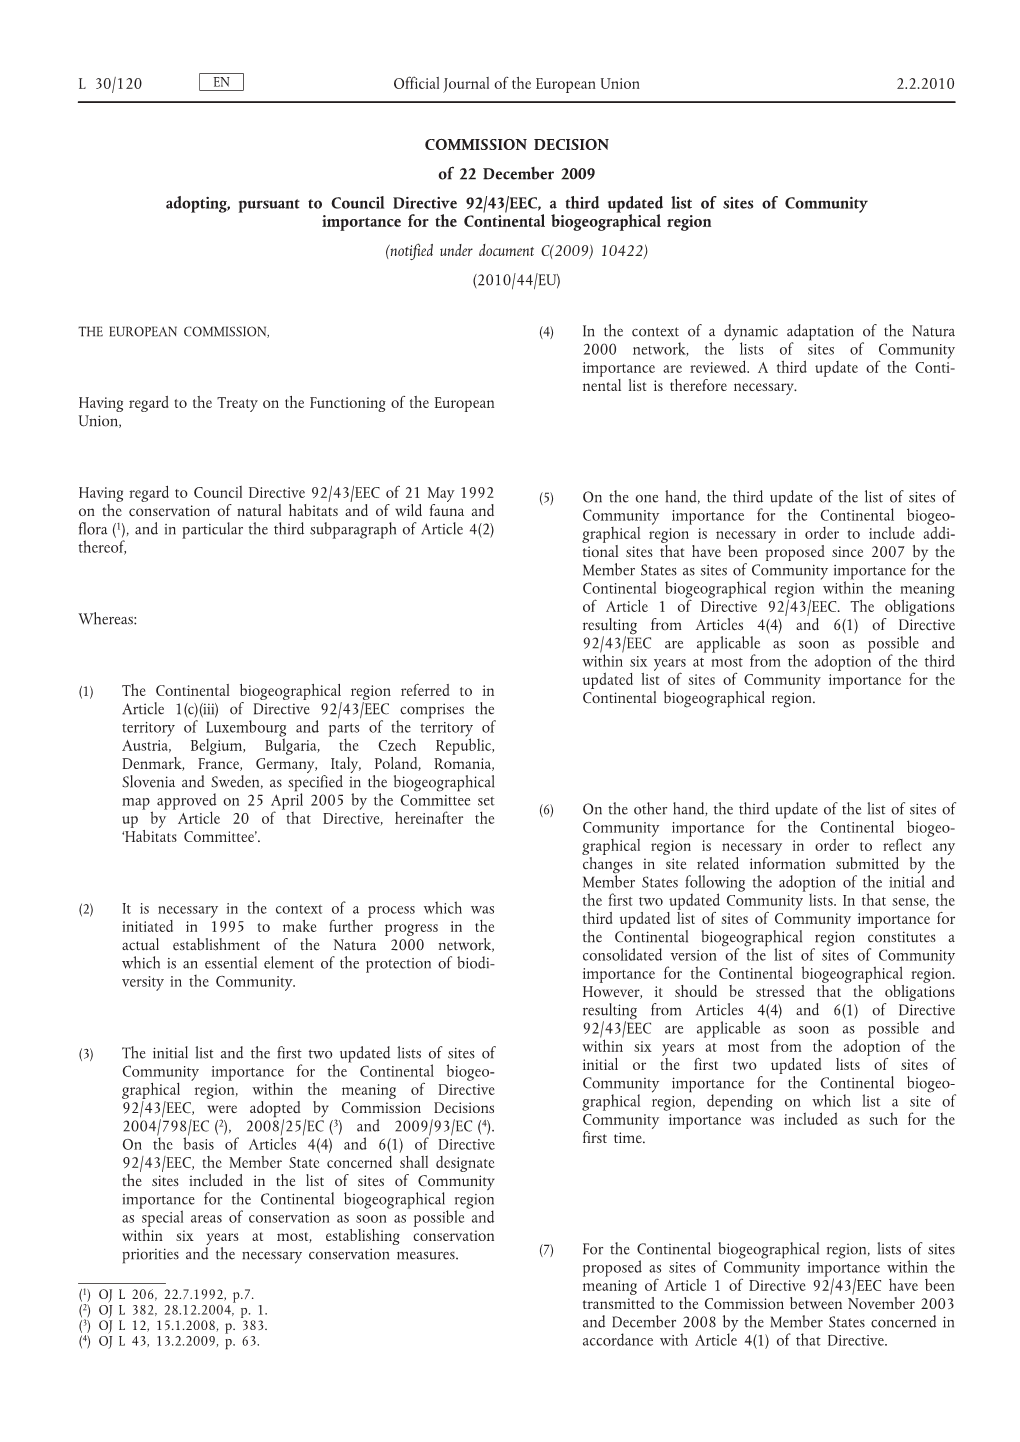 Commission Decision of 22 December 2009 Adopting, Pursuant To